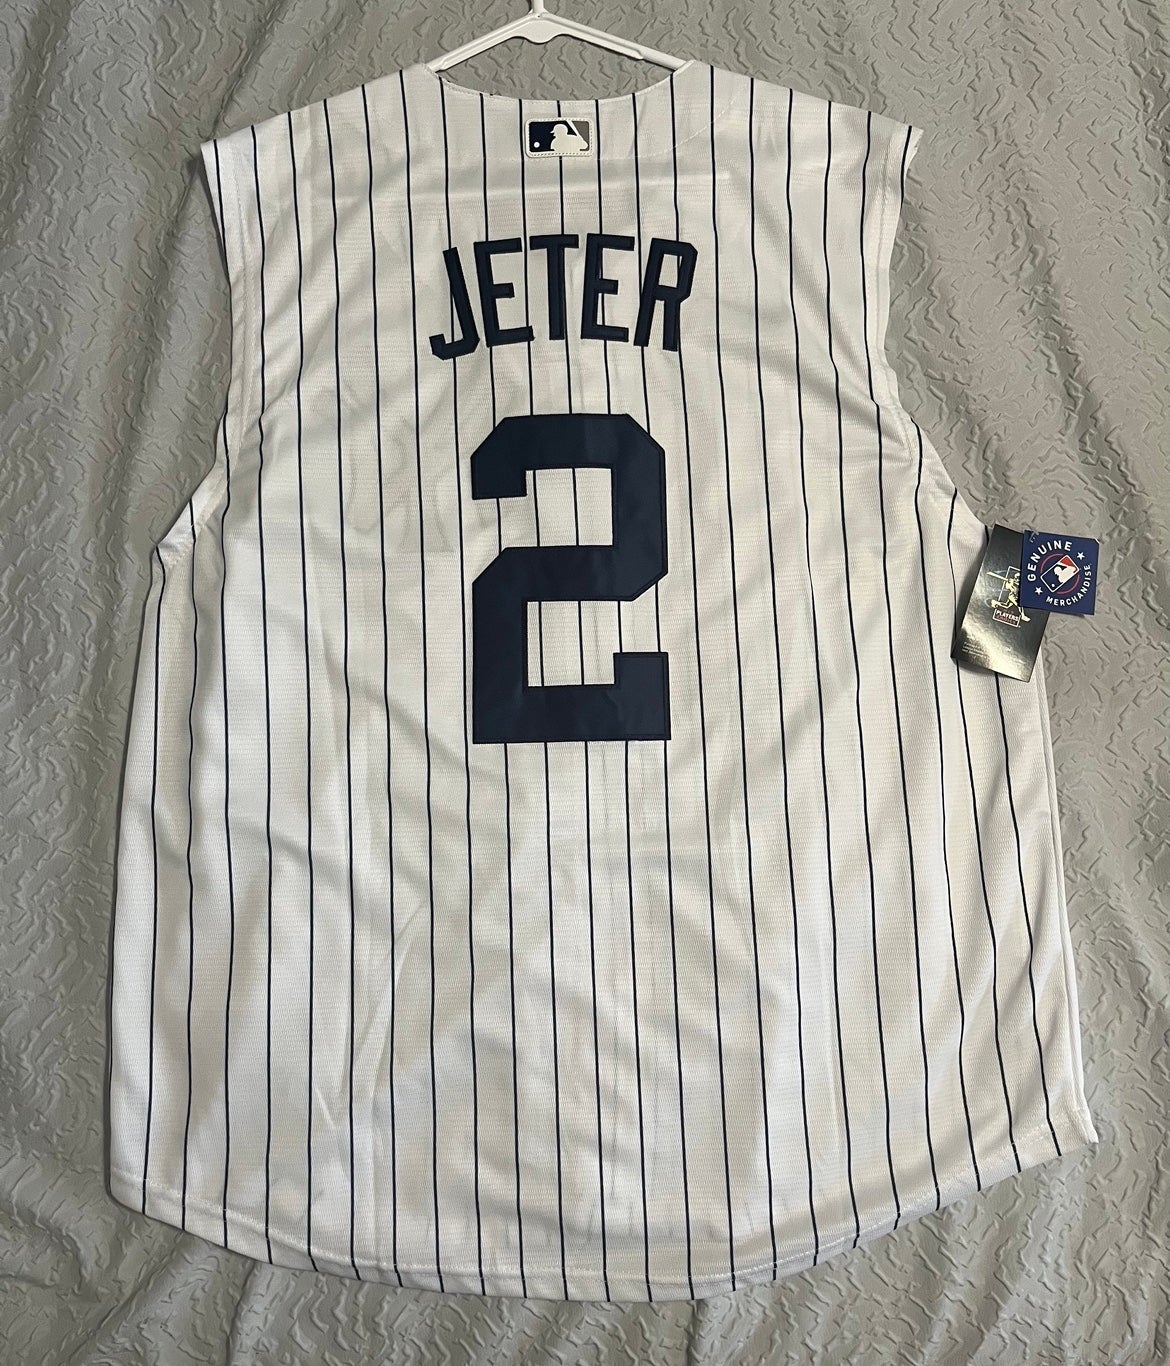 New York yankees Aaron Judge away gray and blue stitched baseball jersey  NWT